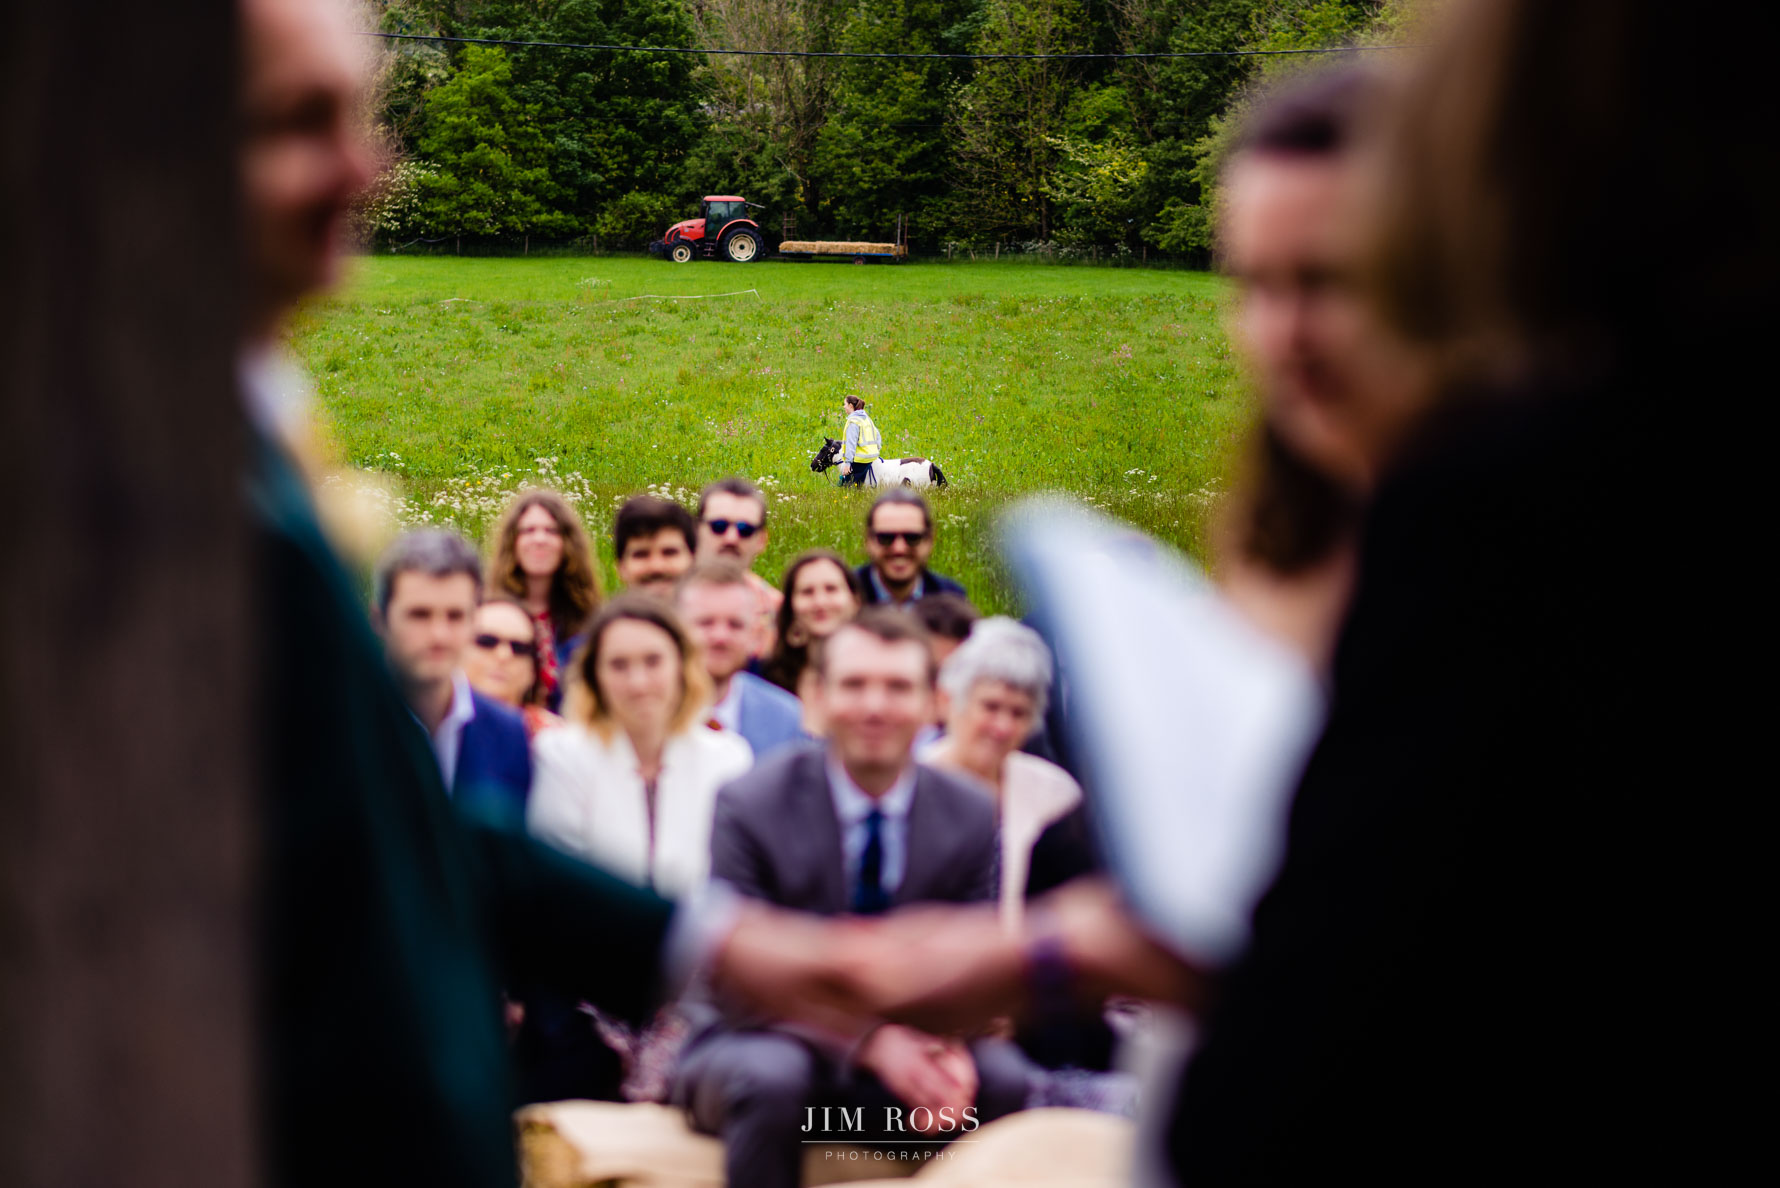 donkey ring bearer spotted approaching in distance behind wedding guests